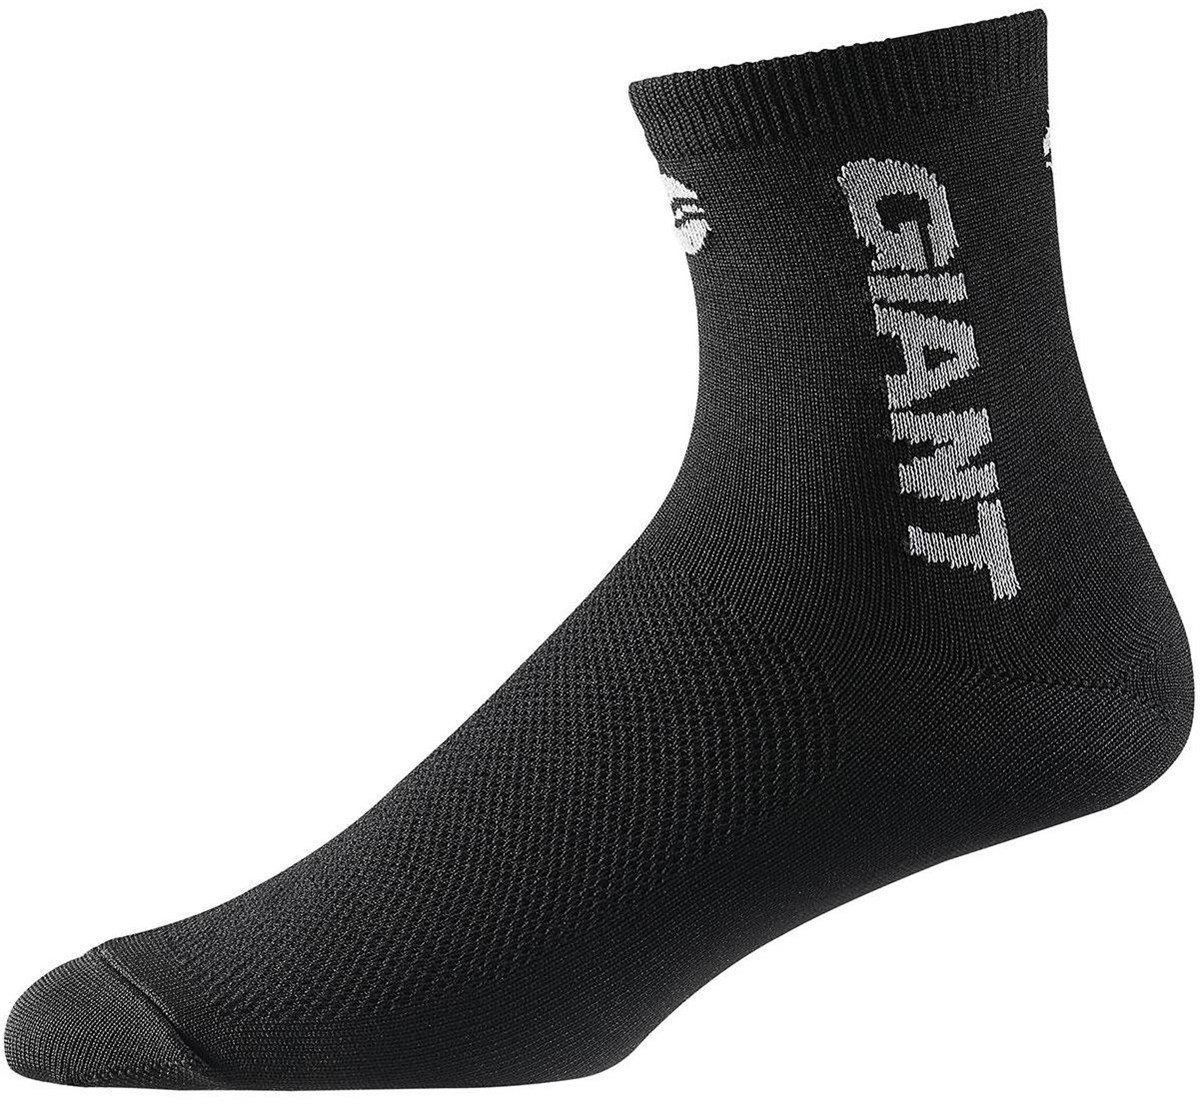 Giant Ally Quarter Cycling Socks product image